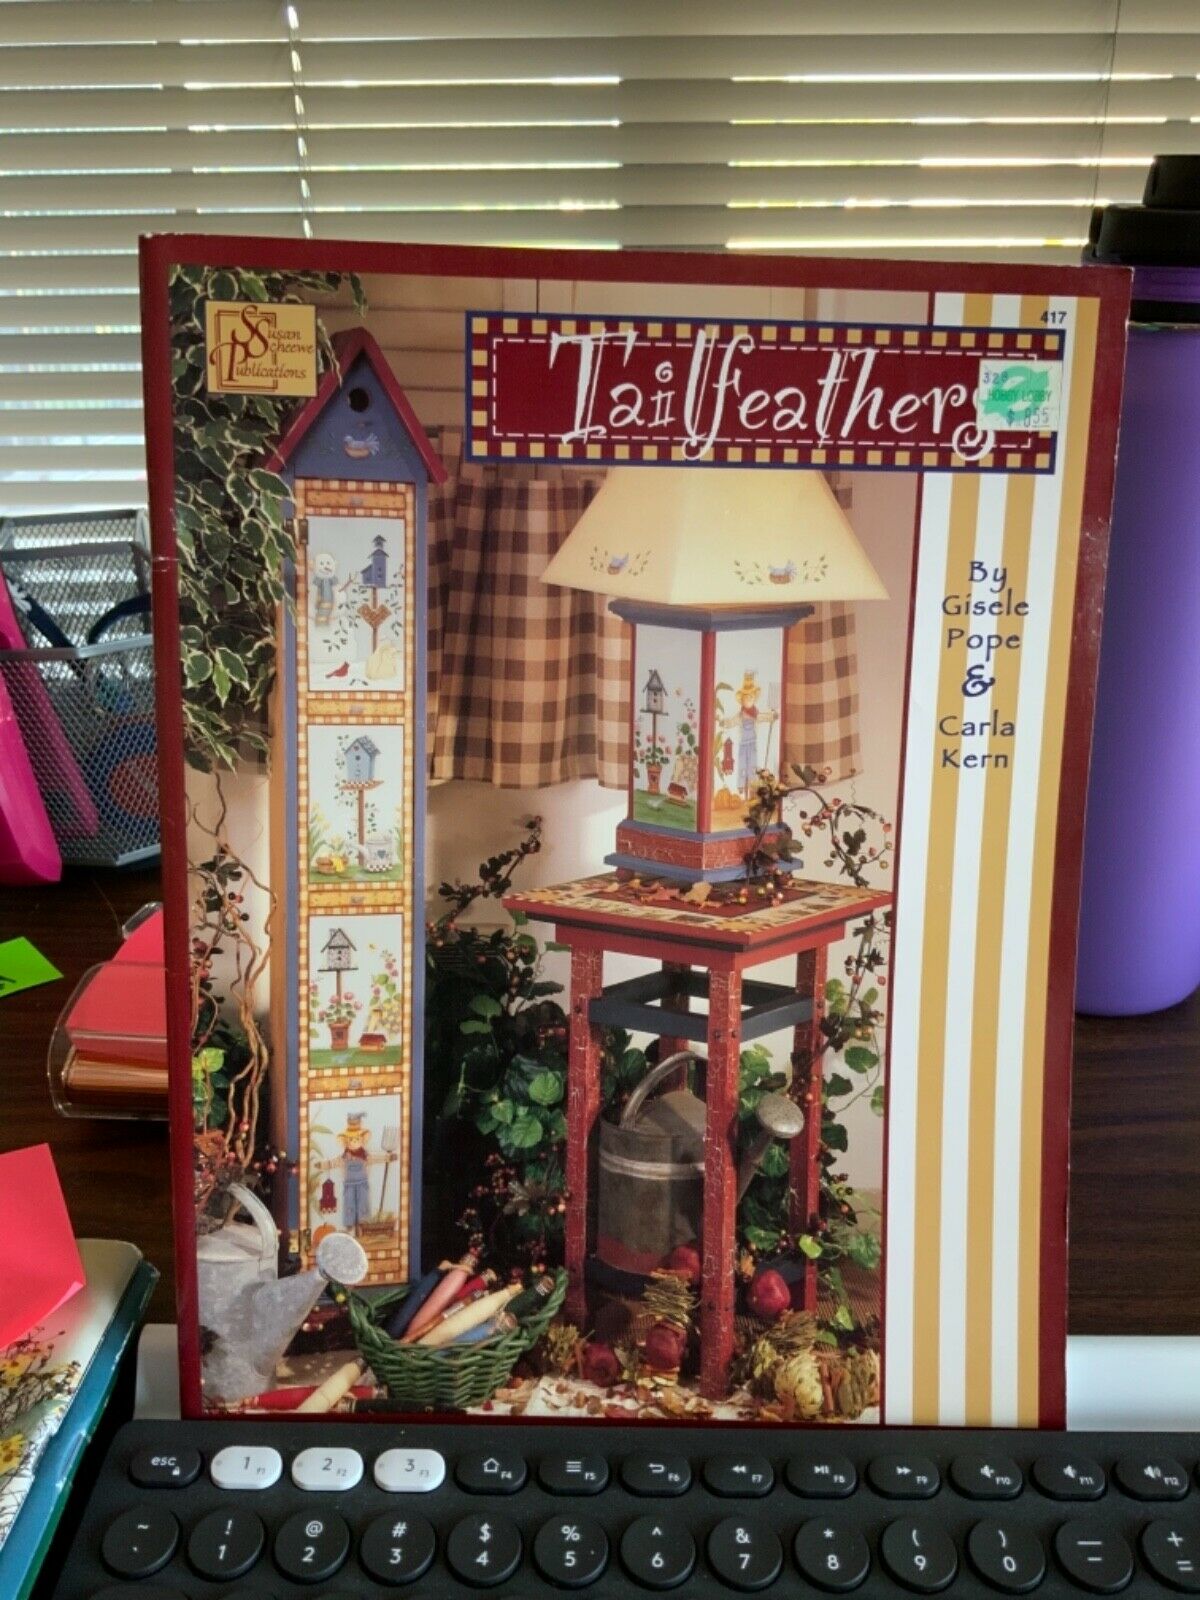 Tailfeathers 1 - Decorative Painting Book By Gisele Pope & Carla Kern